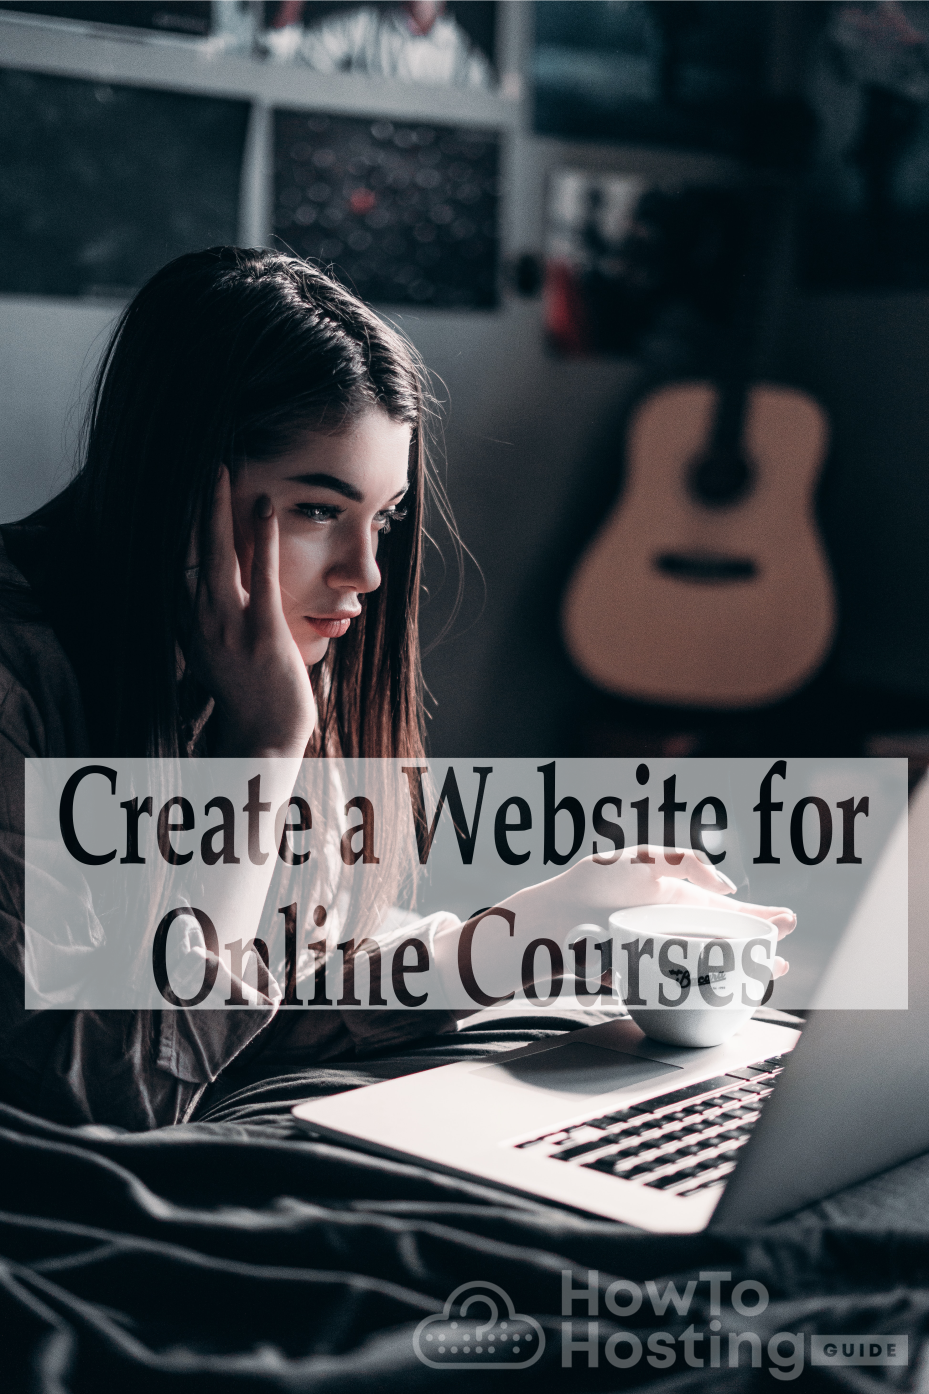 How to Create a Website for Online Courses article image